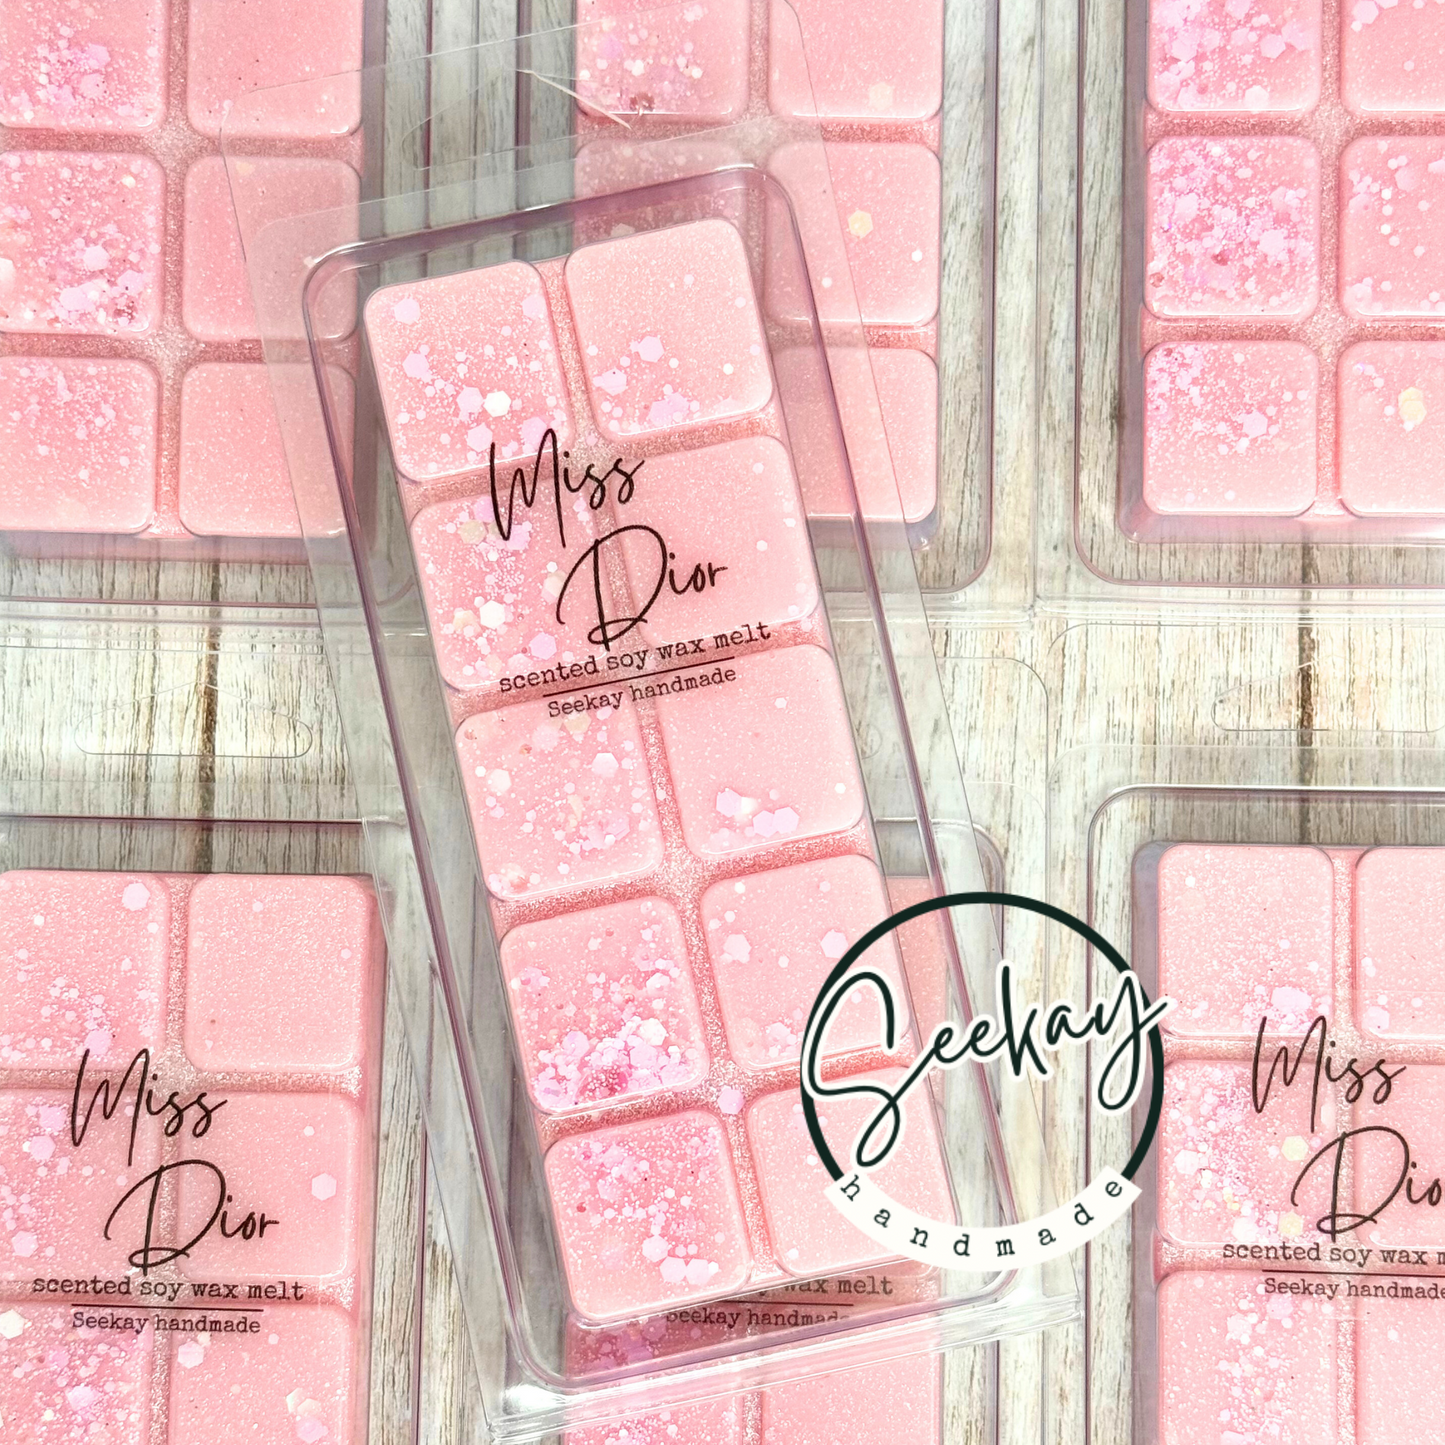 Miss Perfume scented soy wax melt